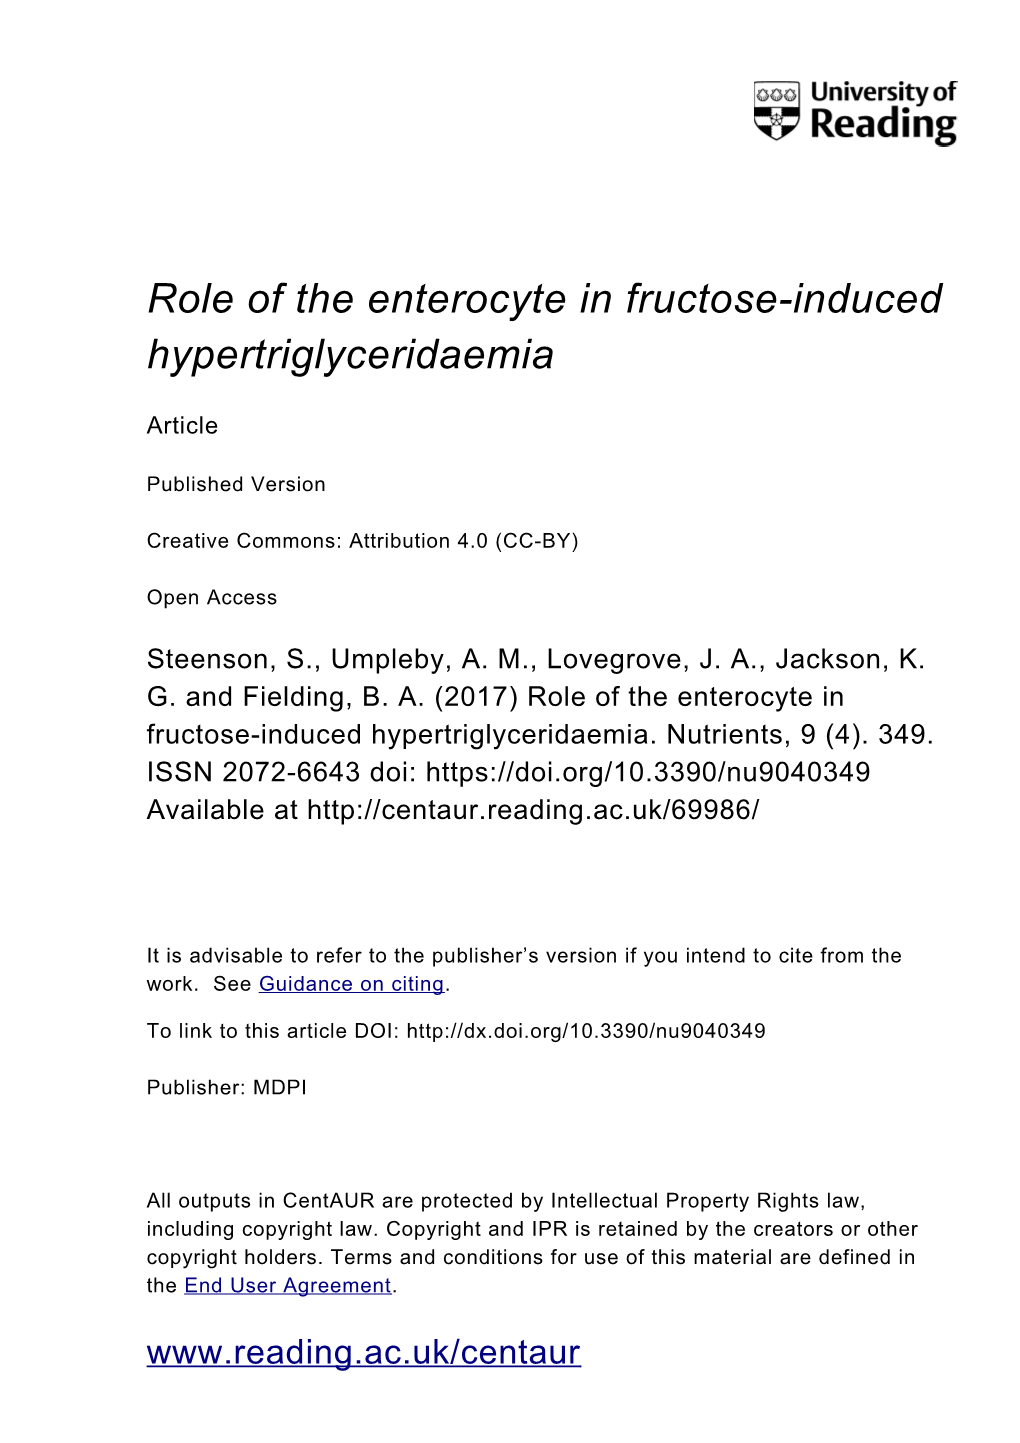 Role of the Enterocyte in Fructose-Induced Hypertriglyceridaemia